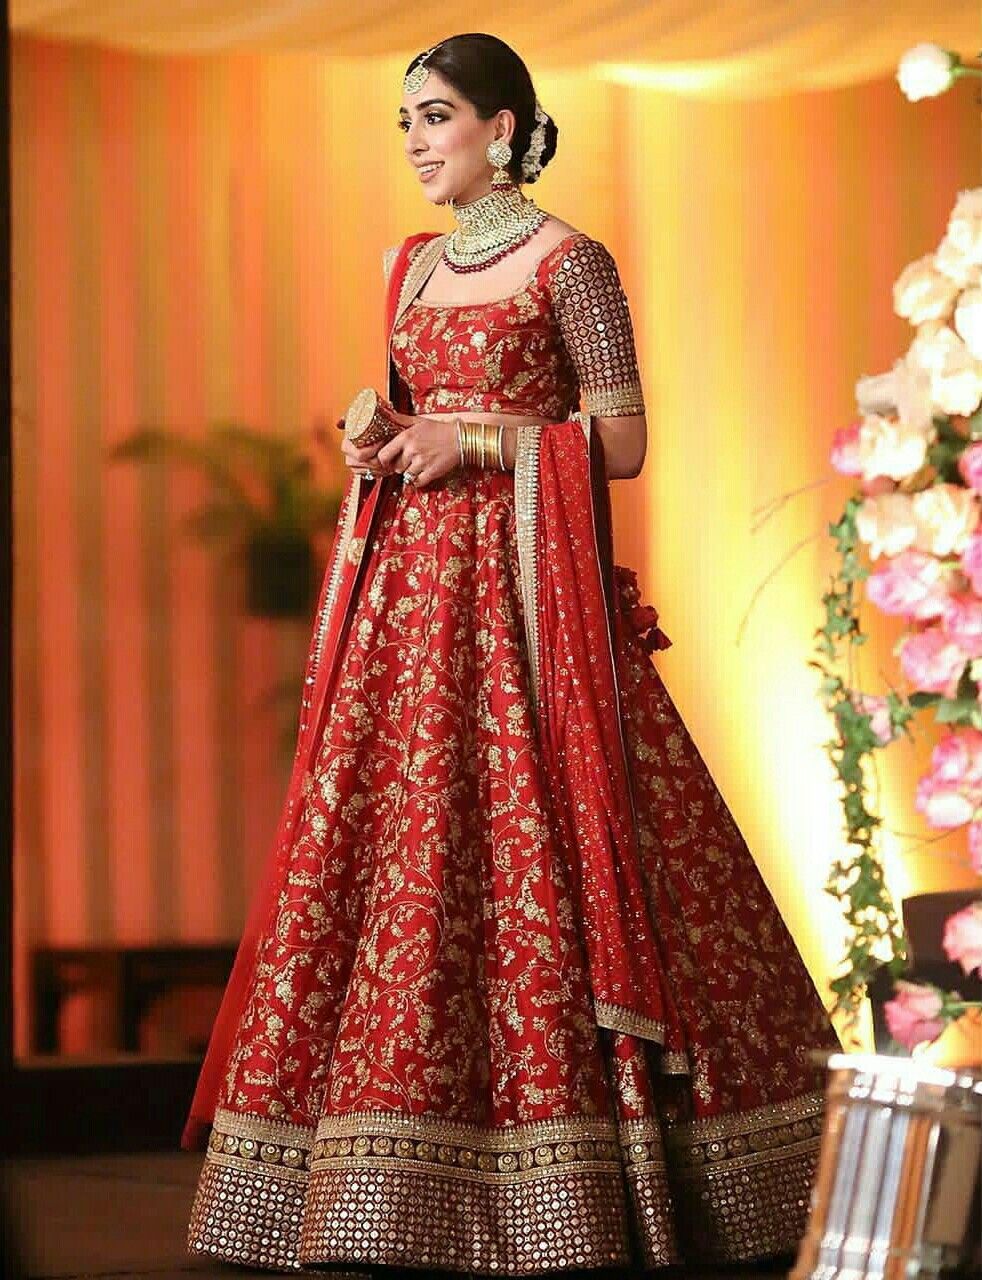 You are currently viewing SPLENDID COLLECTION OF WEDDING LEHENGAS